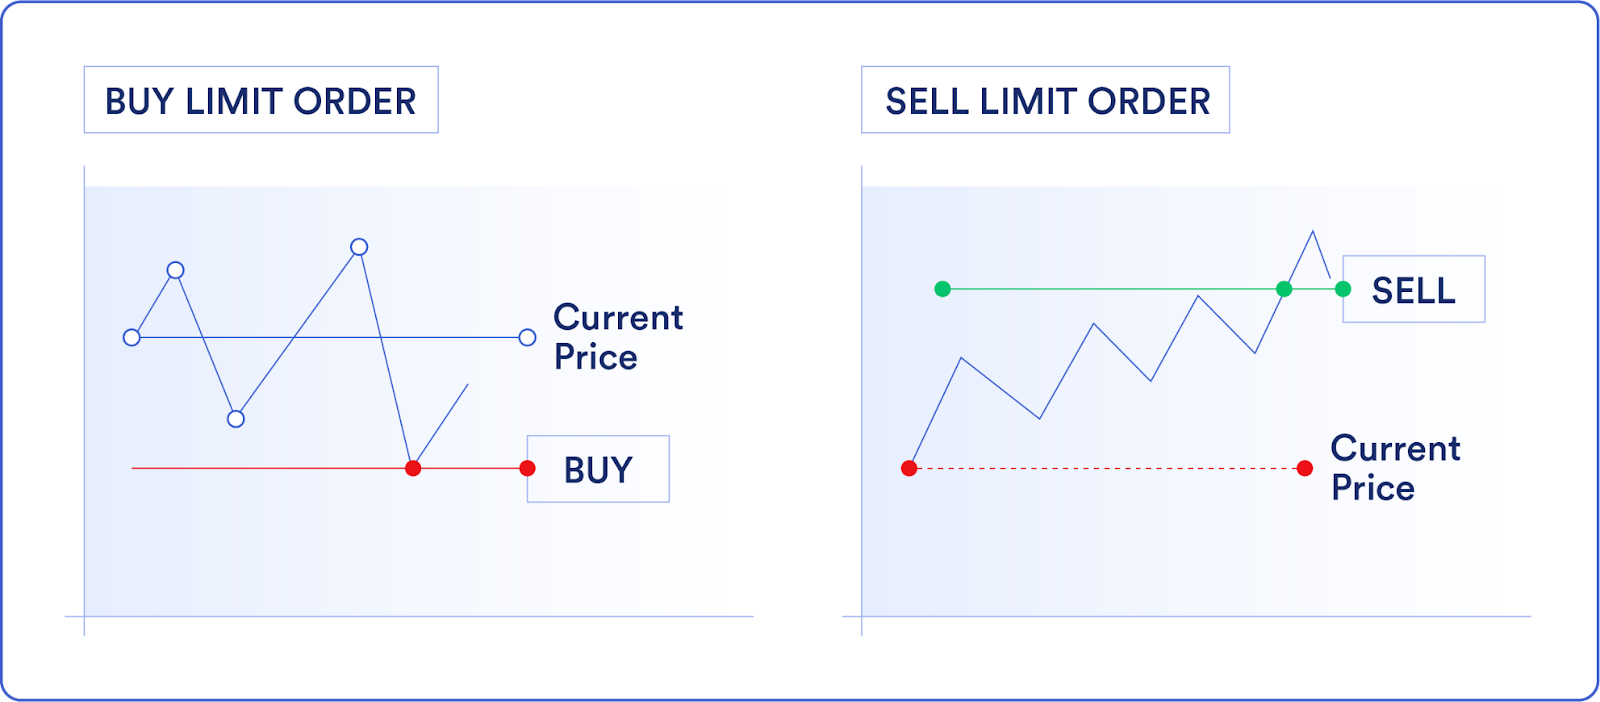 An image showing how limit orders allow traders to specify future entry and exit points.